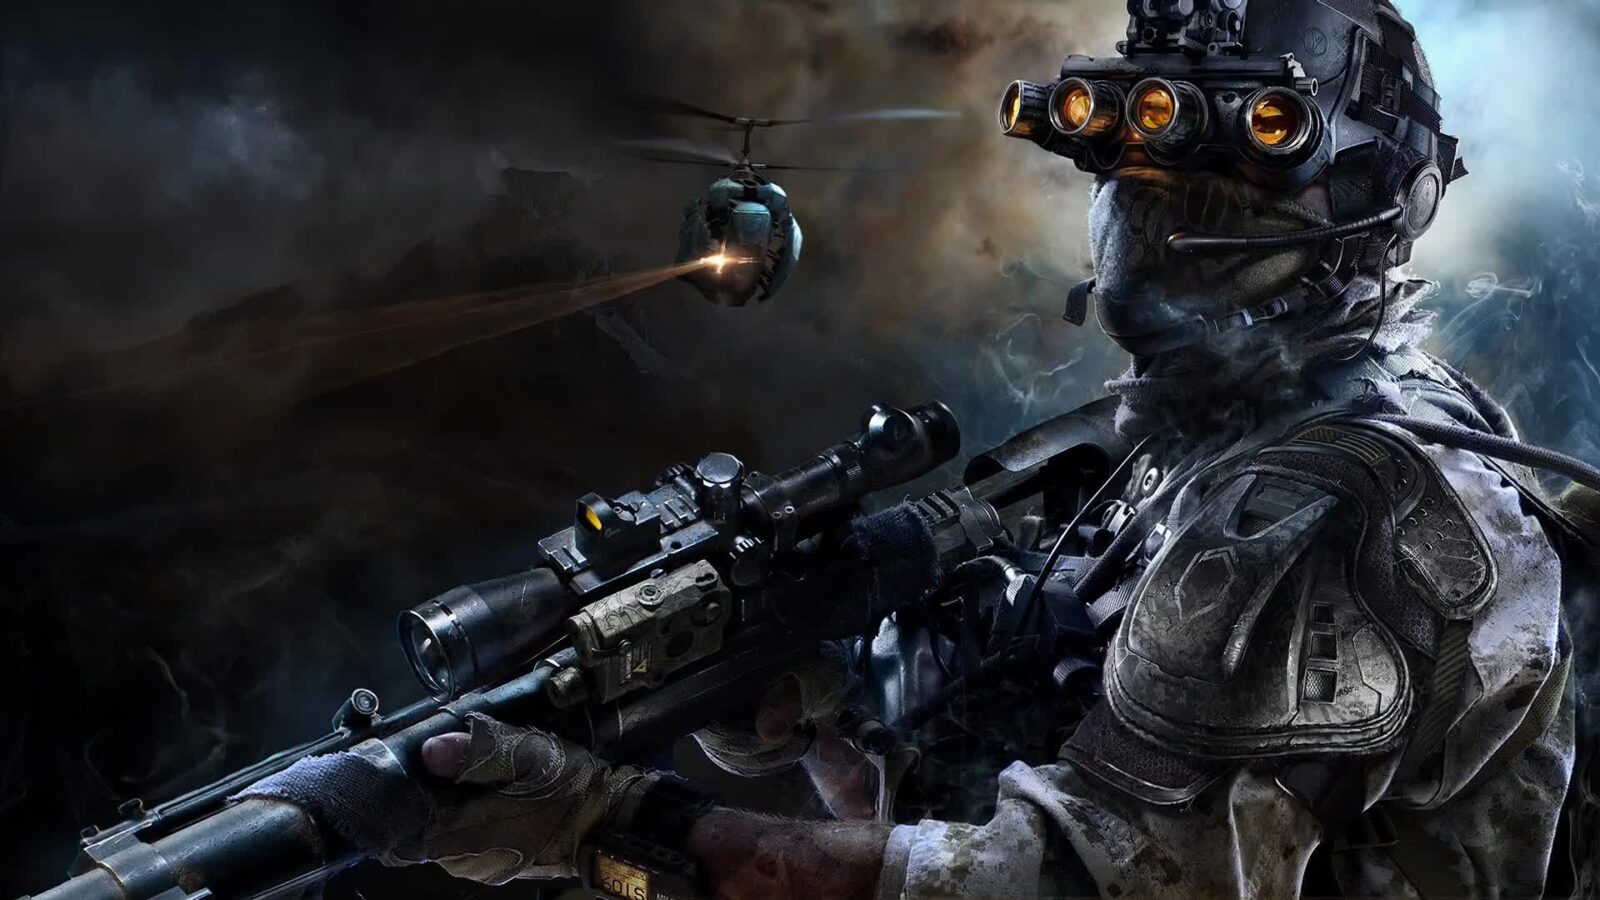 LiveWallpapers4Free.com | Sniper Ghost Warrior 3 - Free Live Wallpaper